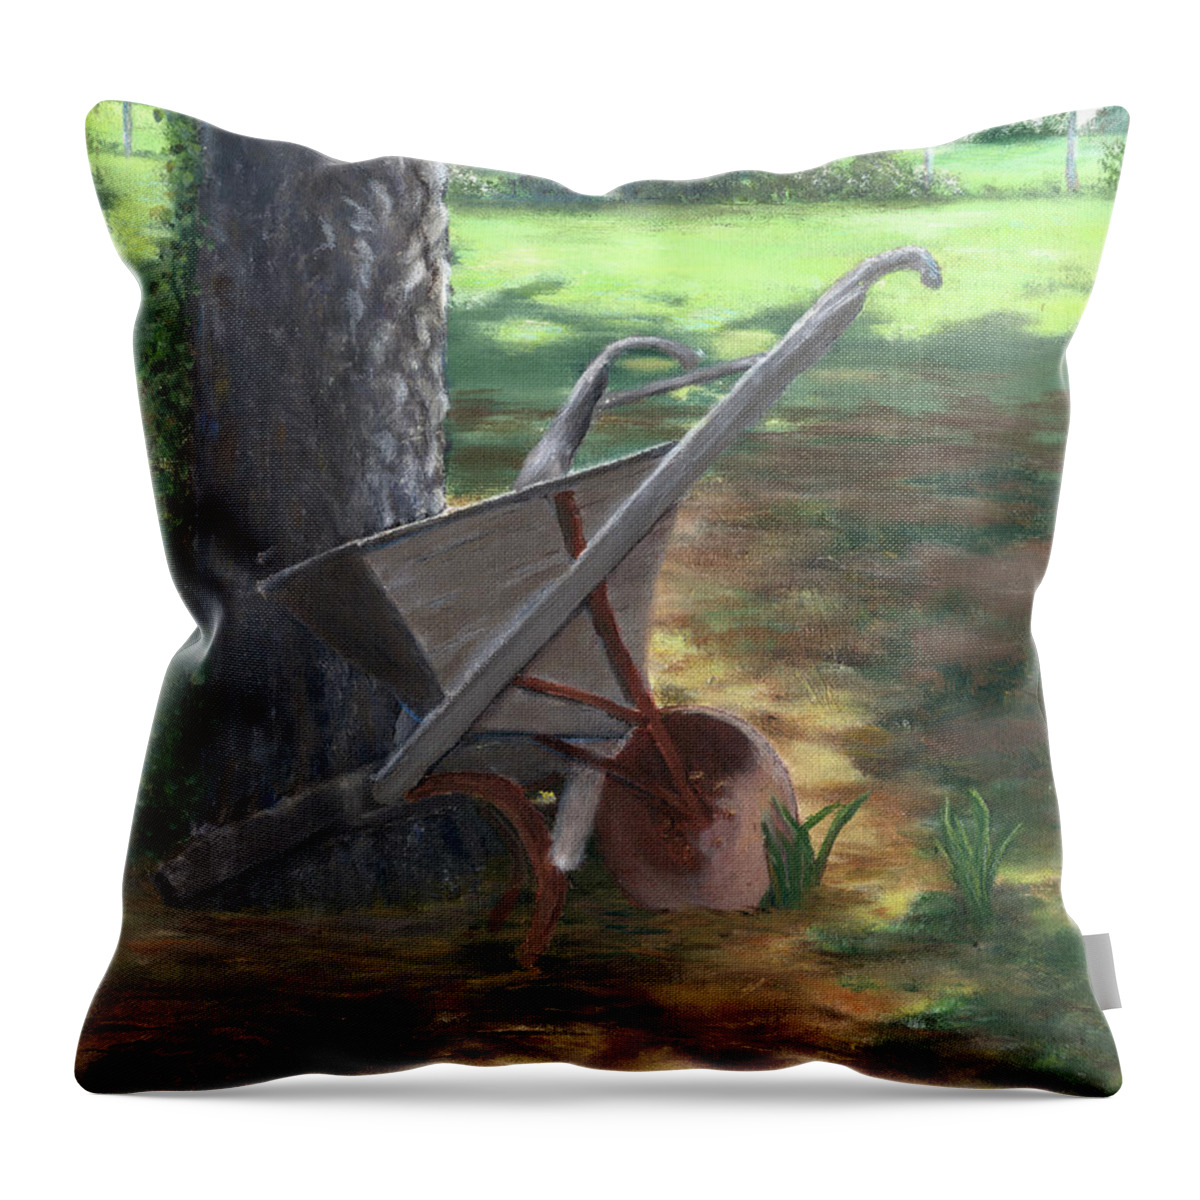 Seeder Throw Pillow featuring the painting Old Farm Seeder, Louisiana by Lenora De Lude